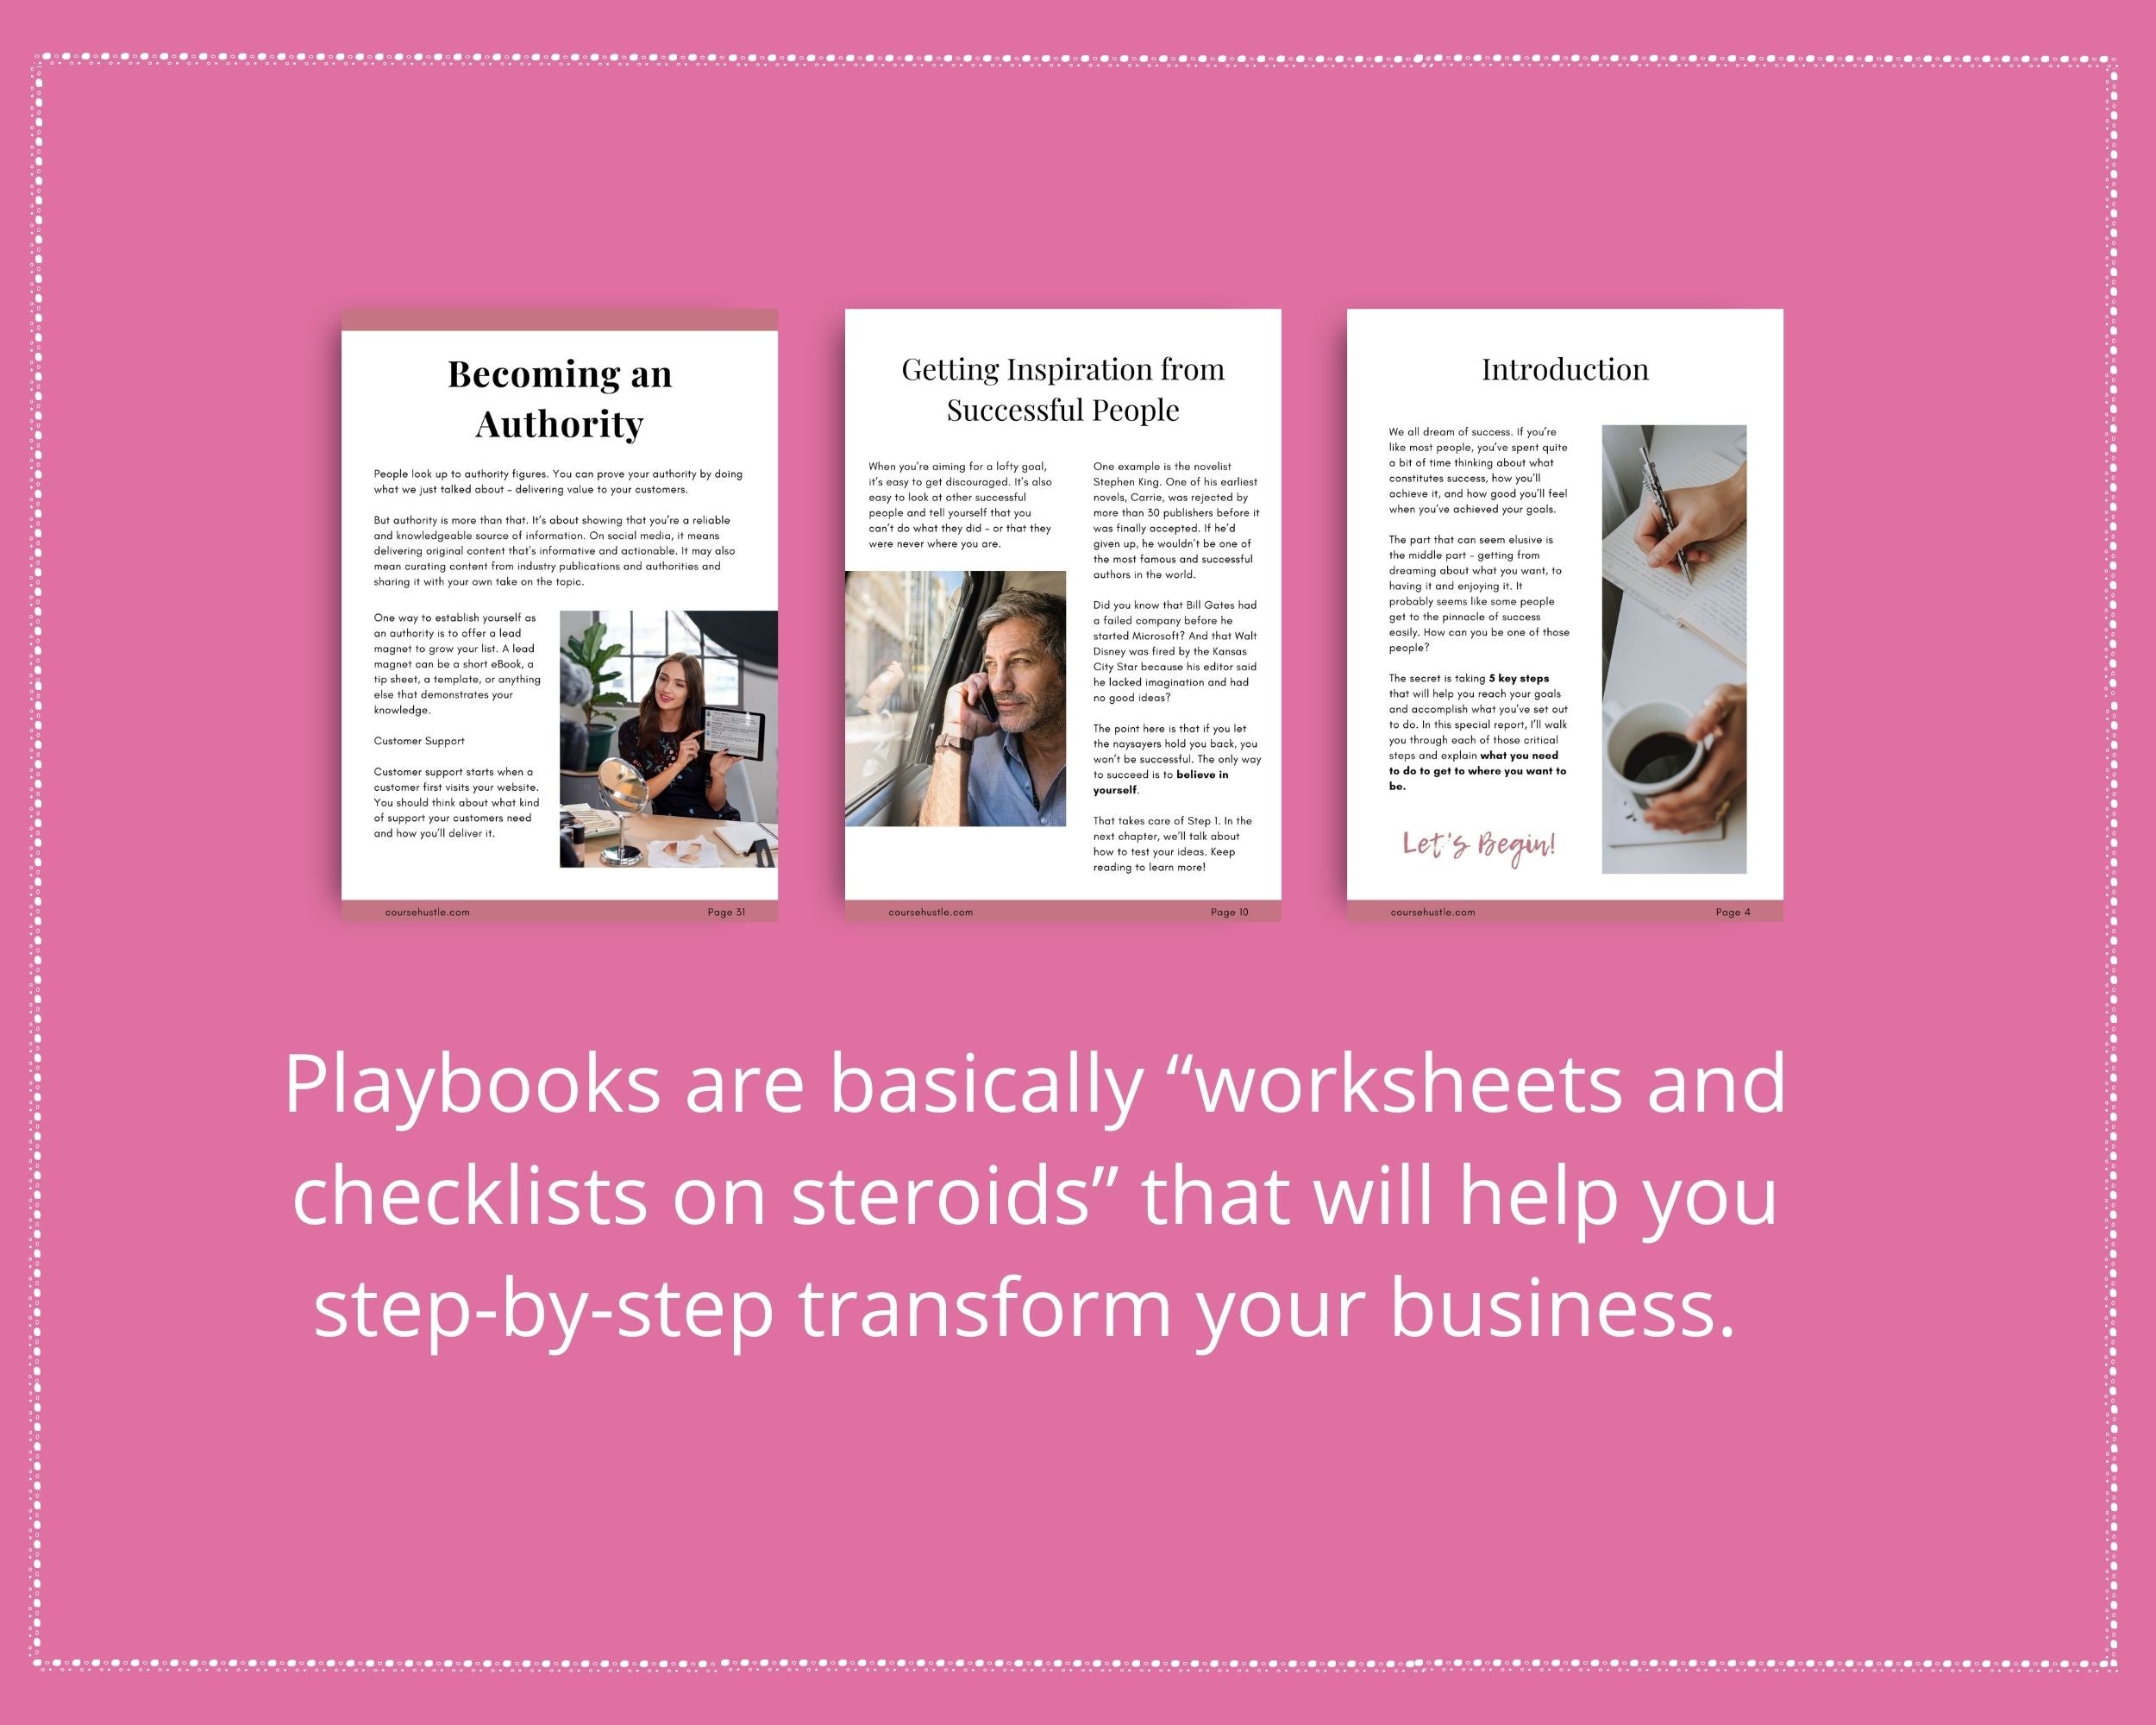 Done-for-You Success Mindset Playbook in Canva | Editable A4 Size Canva Template